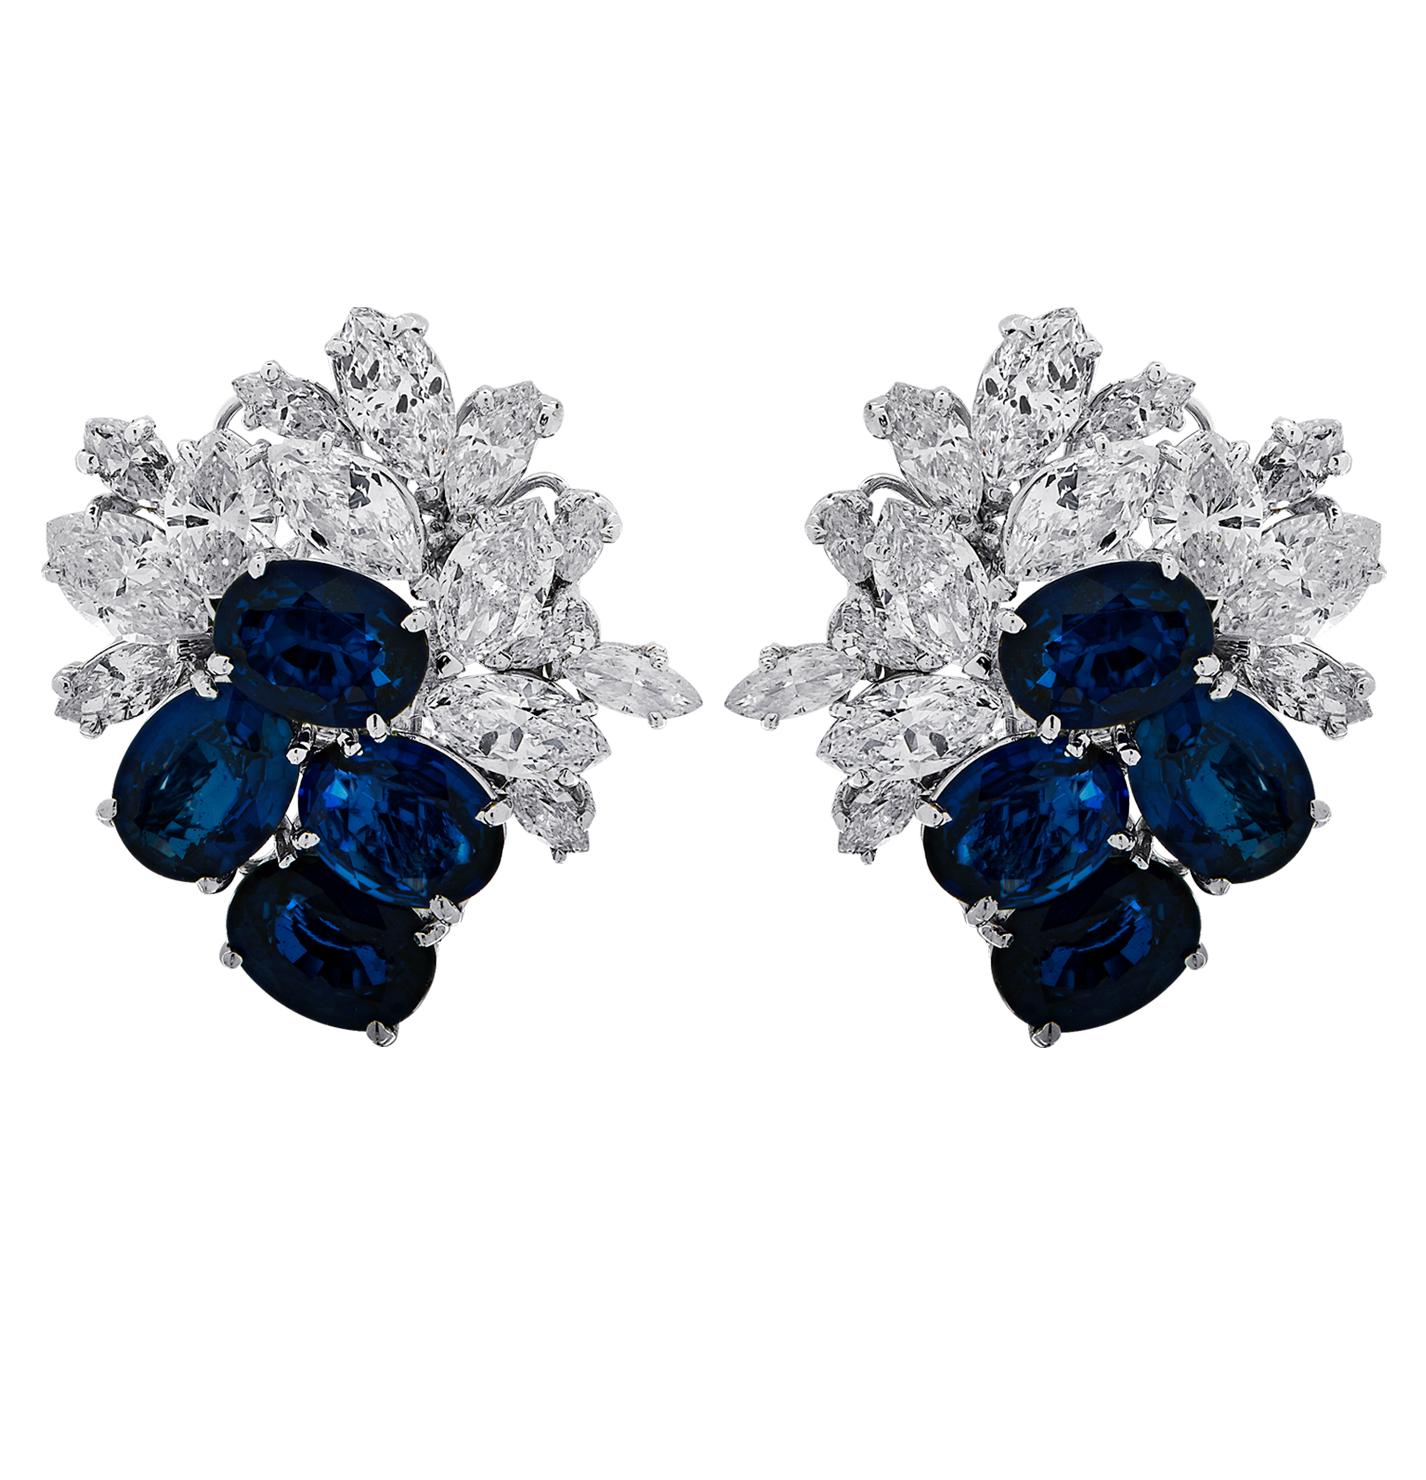 Sensational Vivid Diamonds Sapphire and Diamond cluster earrings crafted in white gold, featuring 28 marquise cut diamonds weighing approximately 8 carats total G-J color, VS-SI clarity, and 8 blue oval sapphires weighing approximately 10 carats